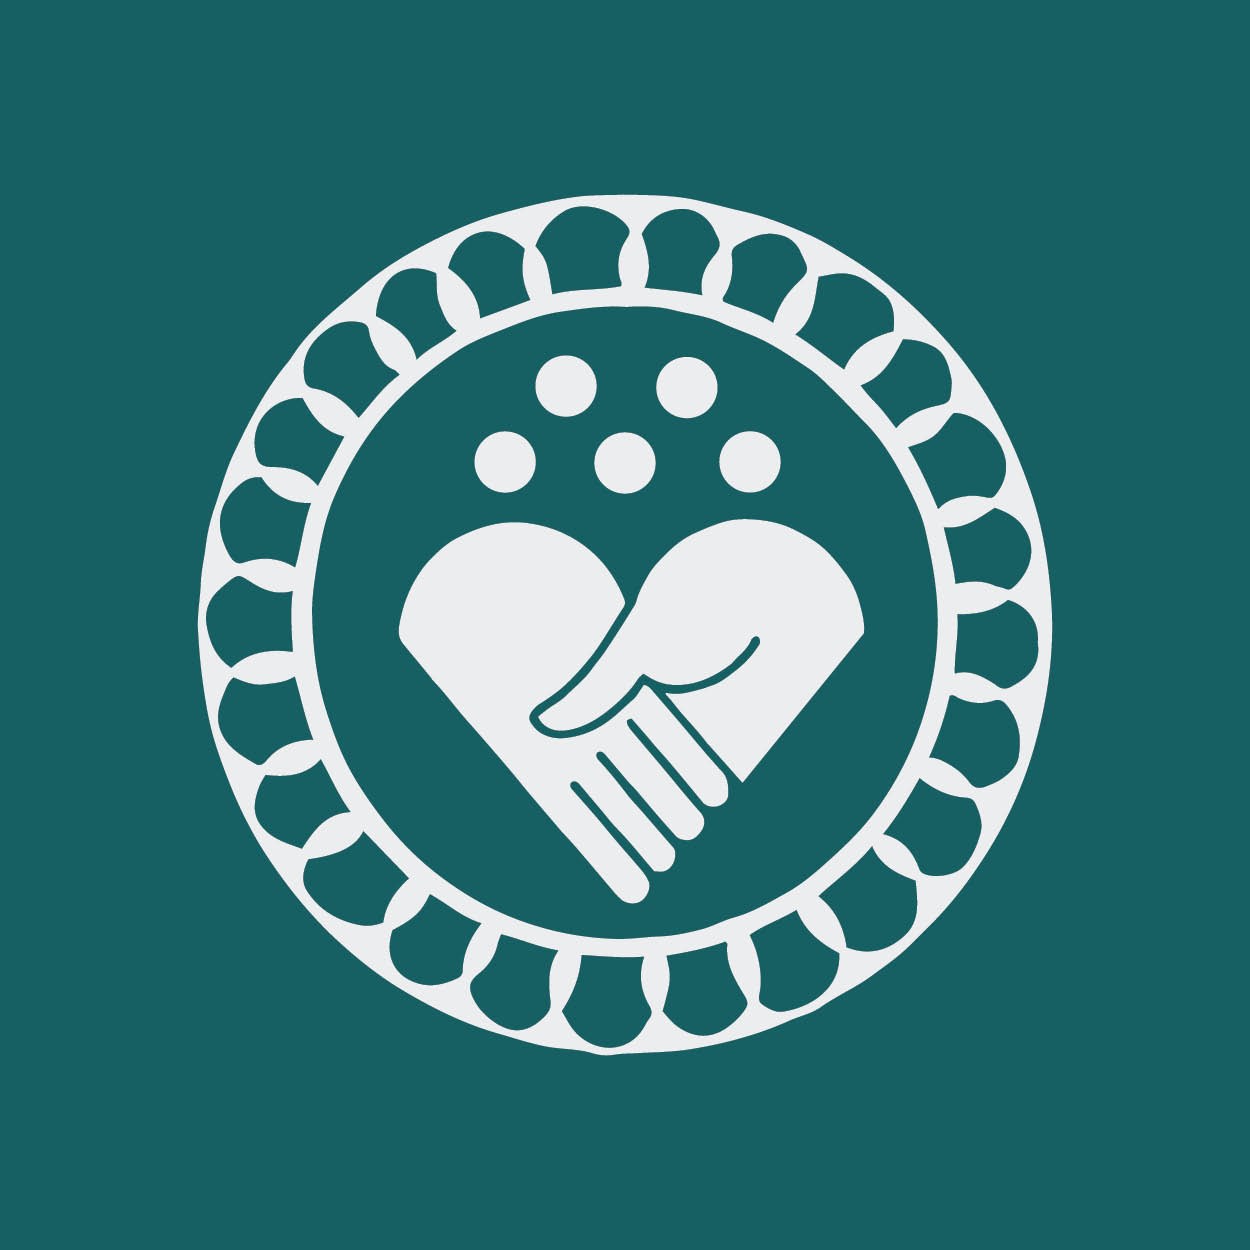 Icon designed by Sandeep Johal: Hands holding in shape of a heart inside a circle